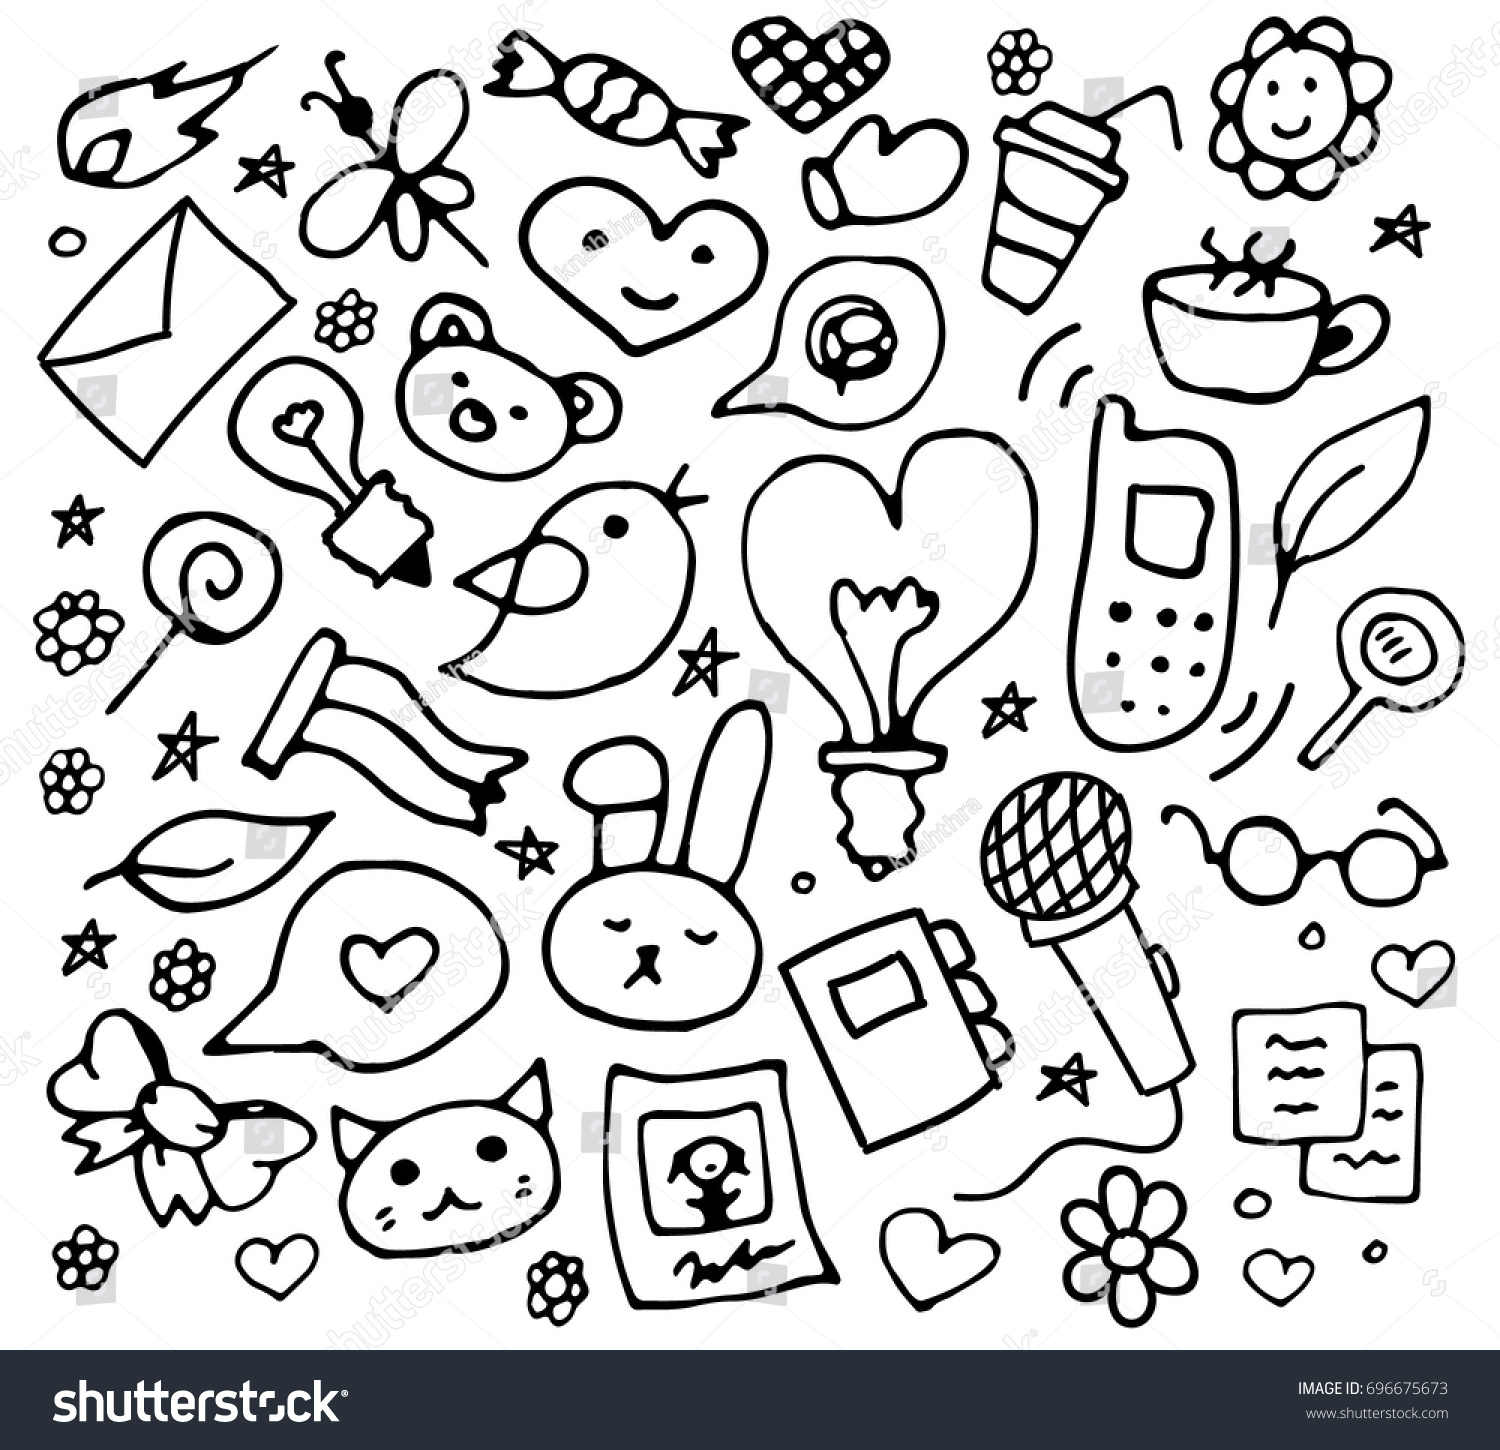 Set Trendy Doodle Hand Drawn Icon Stock Vector 696675673 - Shutterstock